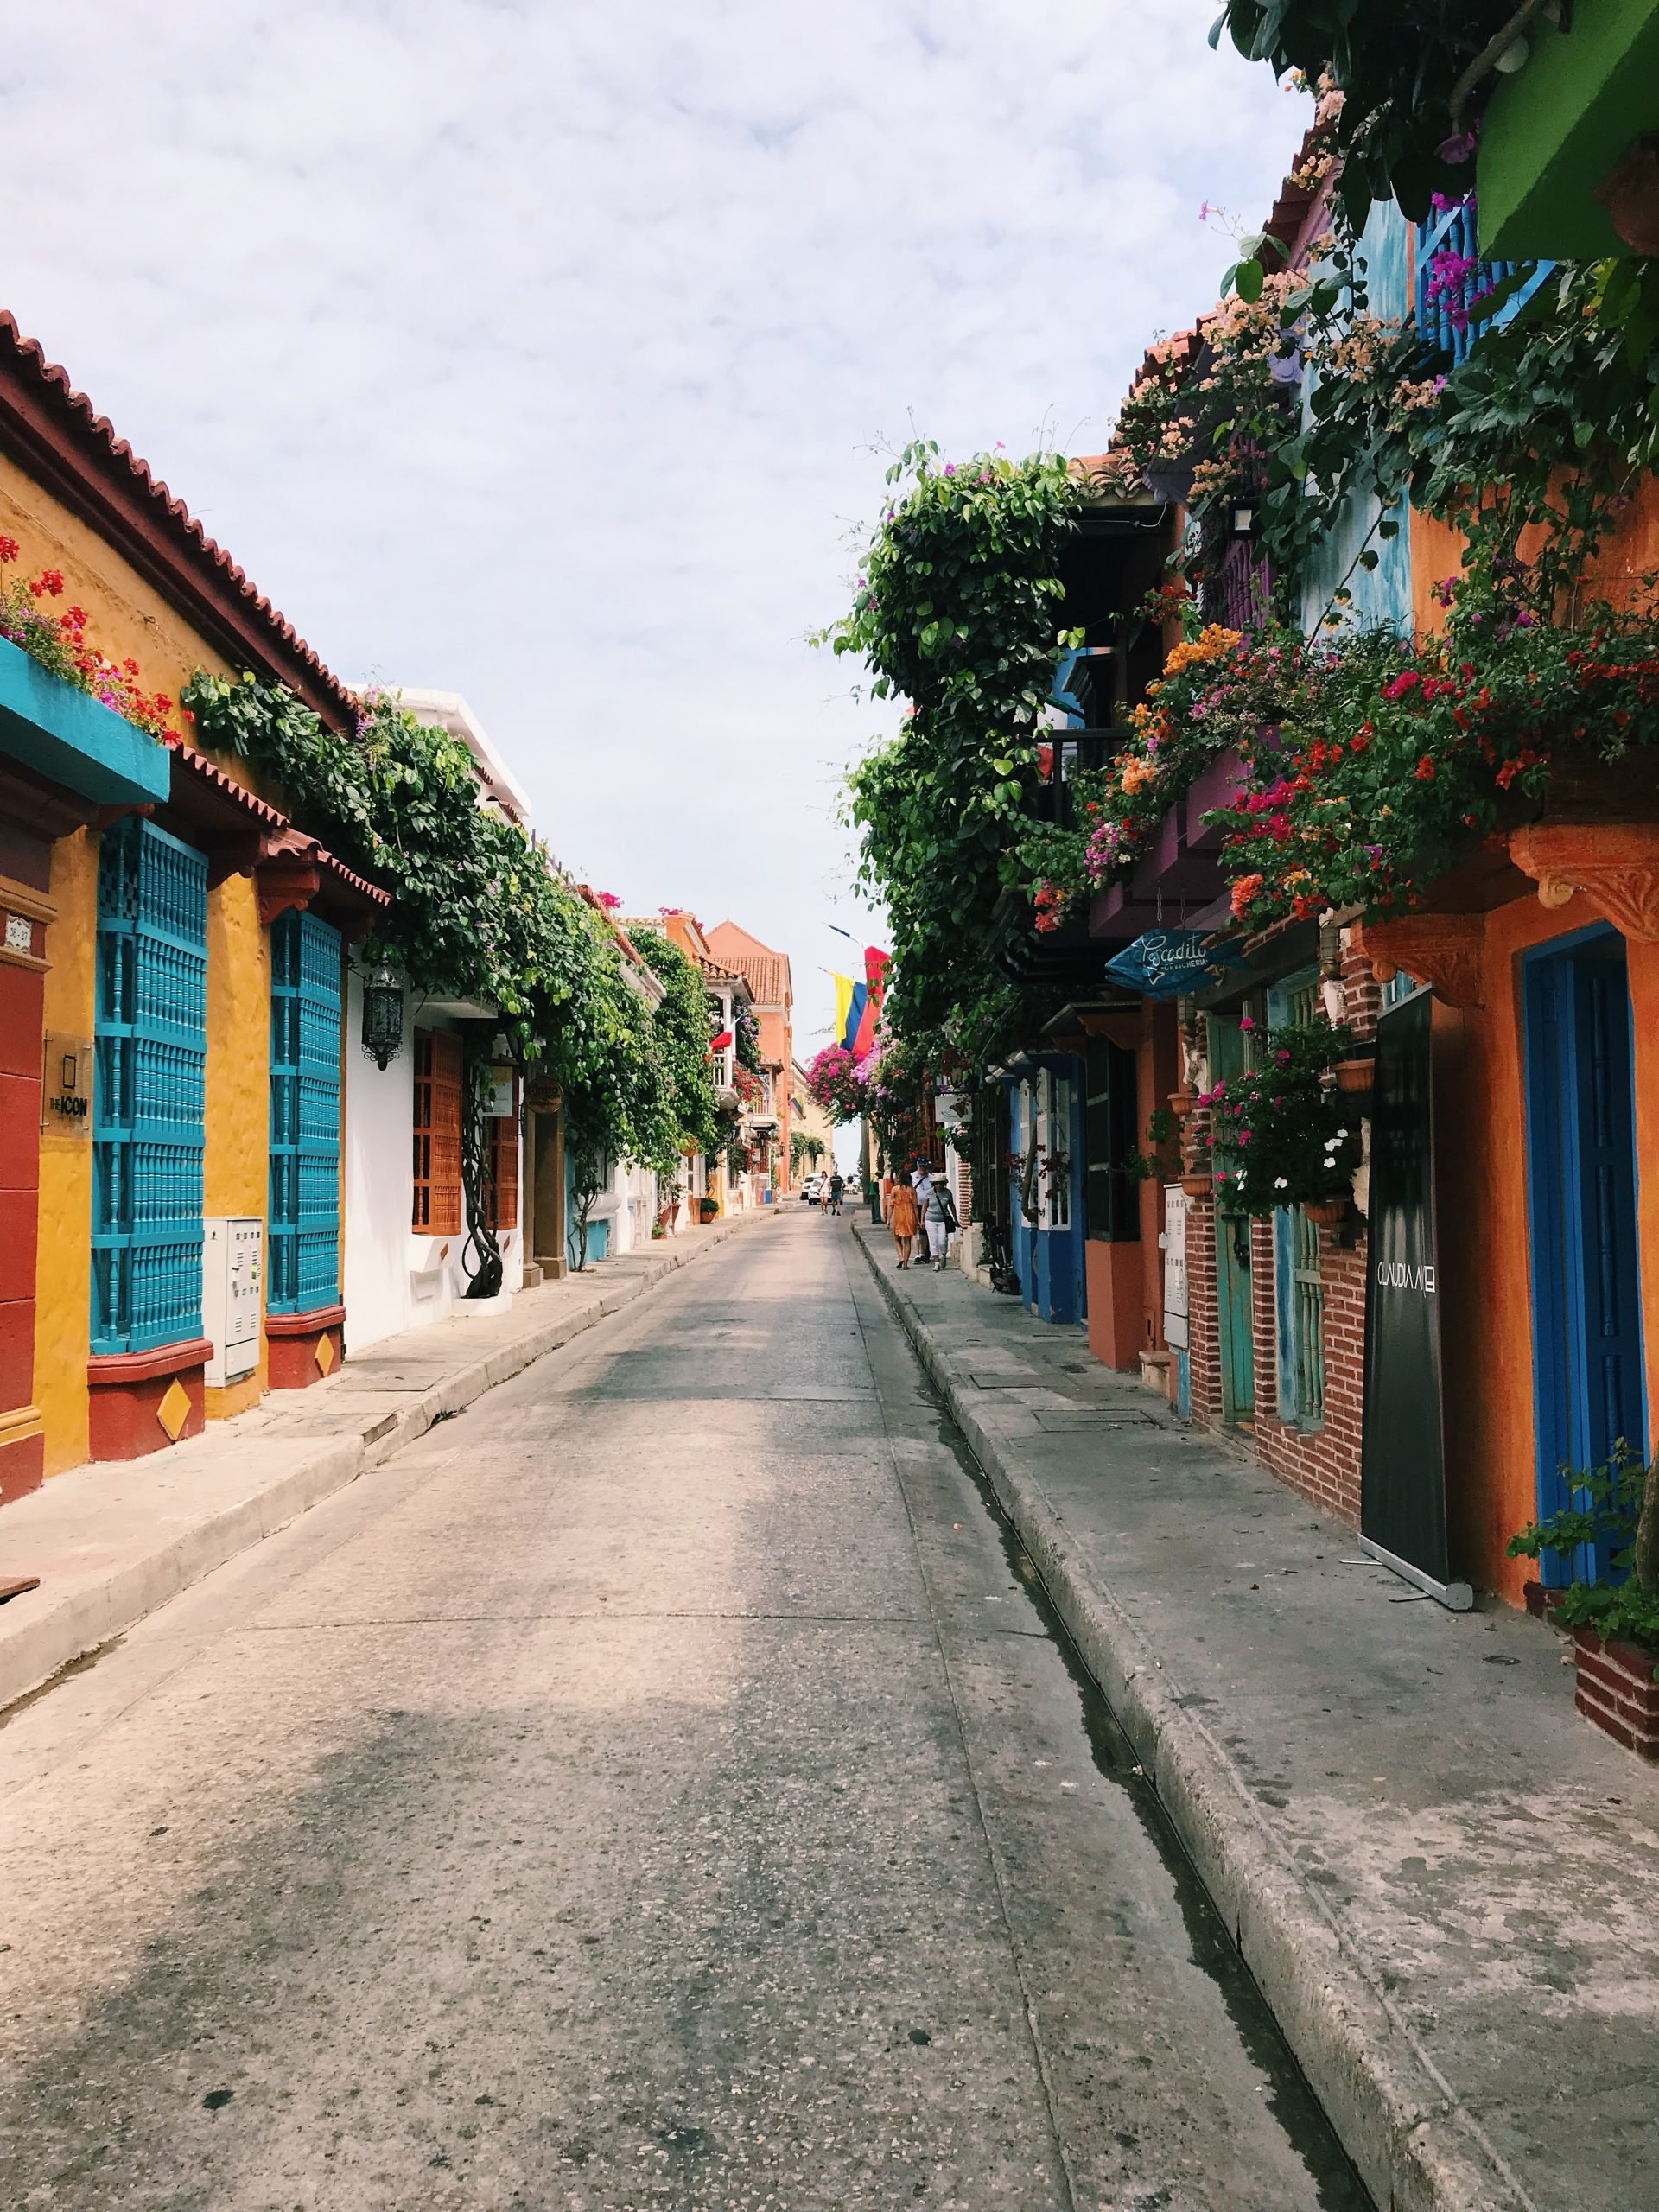 Cartagena, Colombia instagram spots, most instagrammable places in Colombia, Colombia photos, Colombia photography